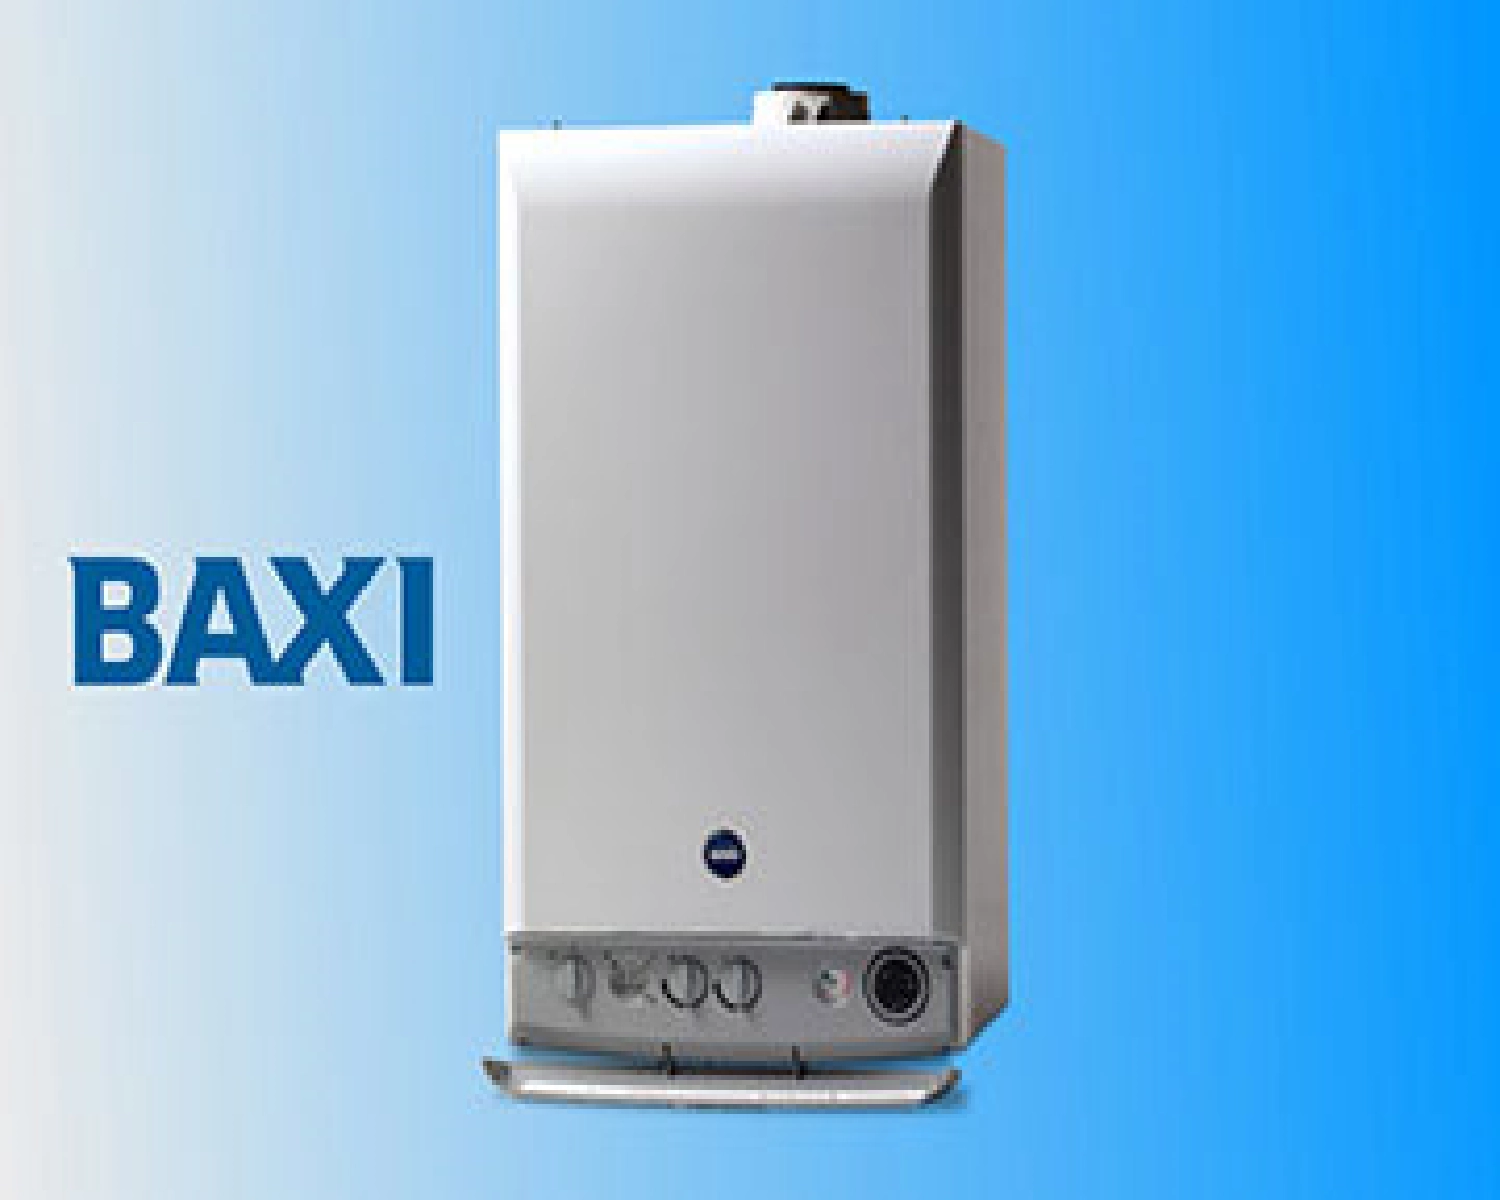 compare a baxi with worcester boiler